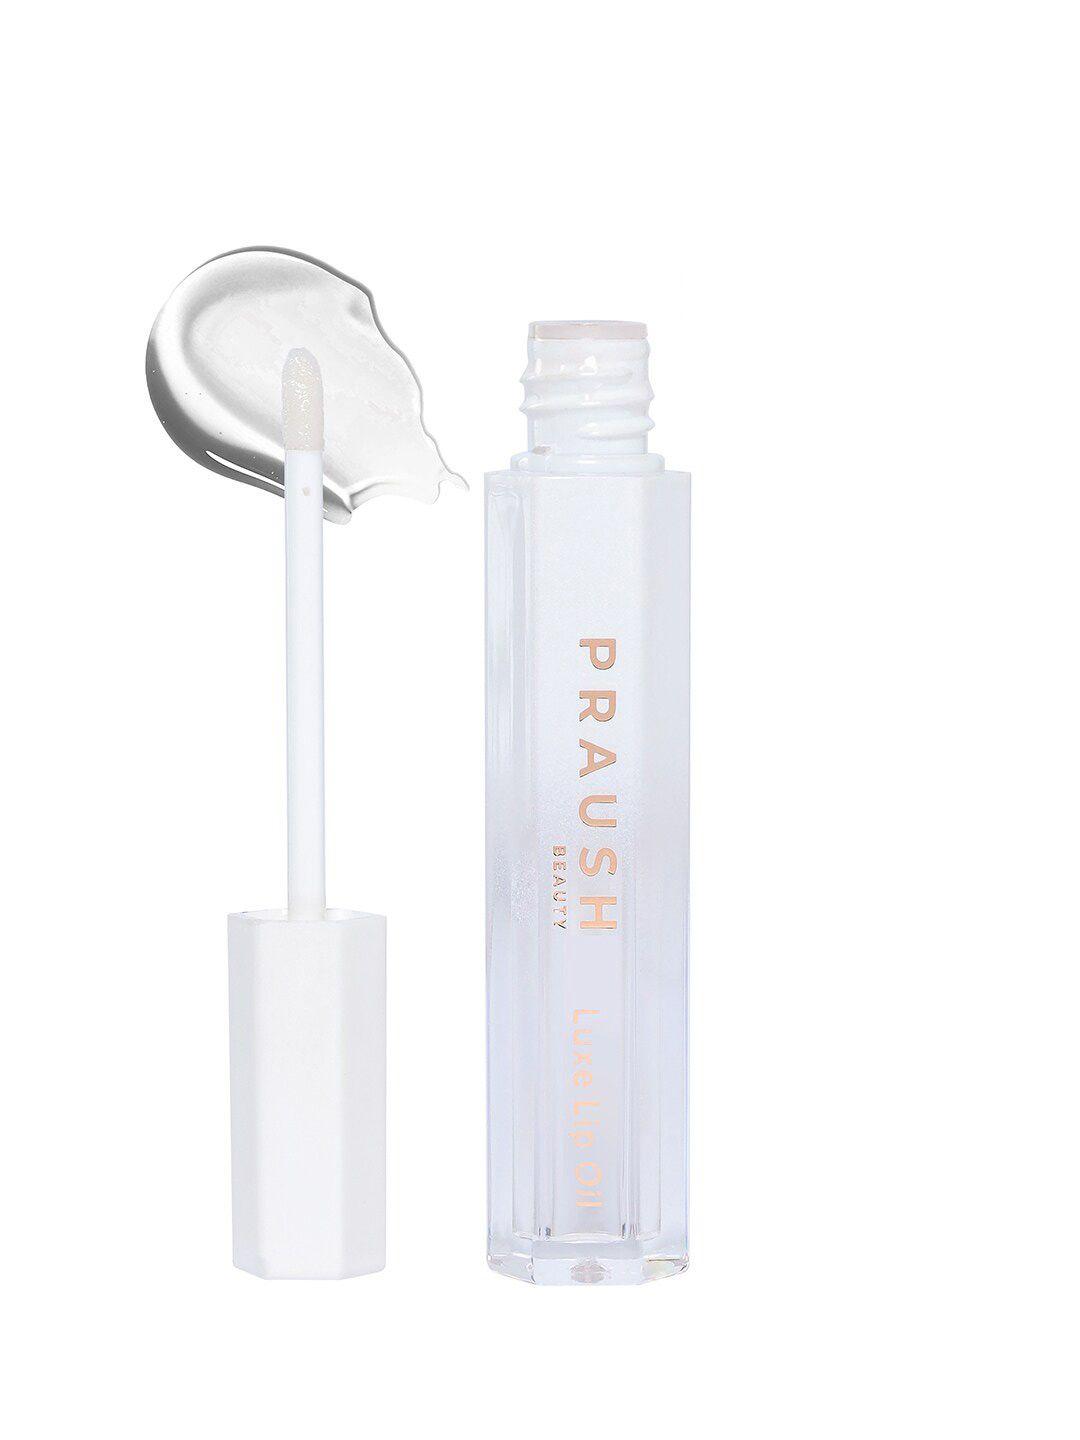 praush pout cushion luxe lip oil for hydrate & shine - 2.3ml - bubble (clear)